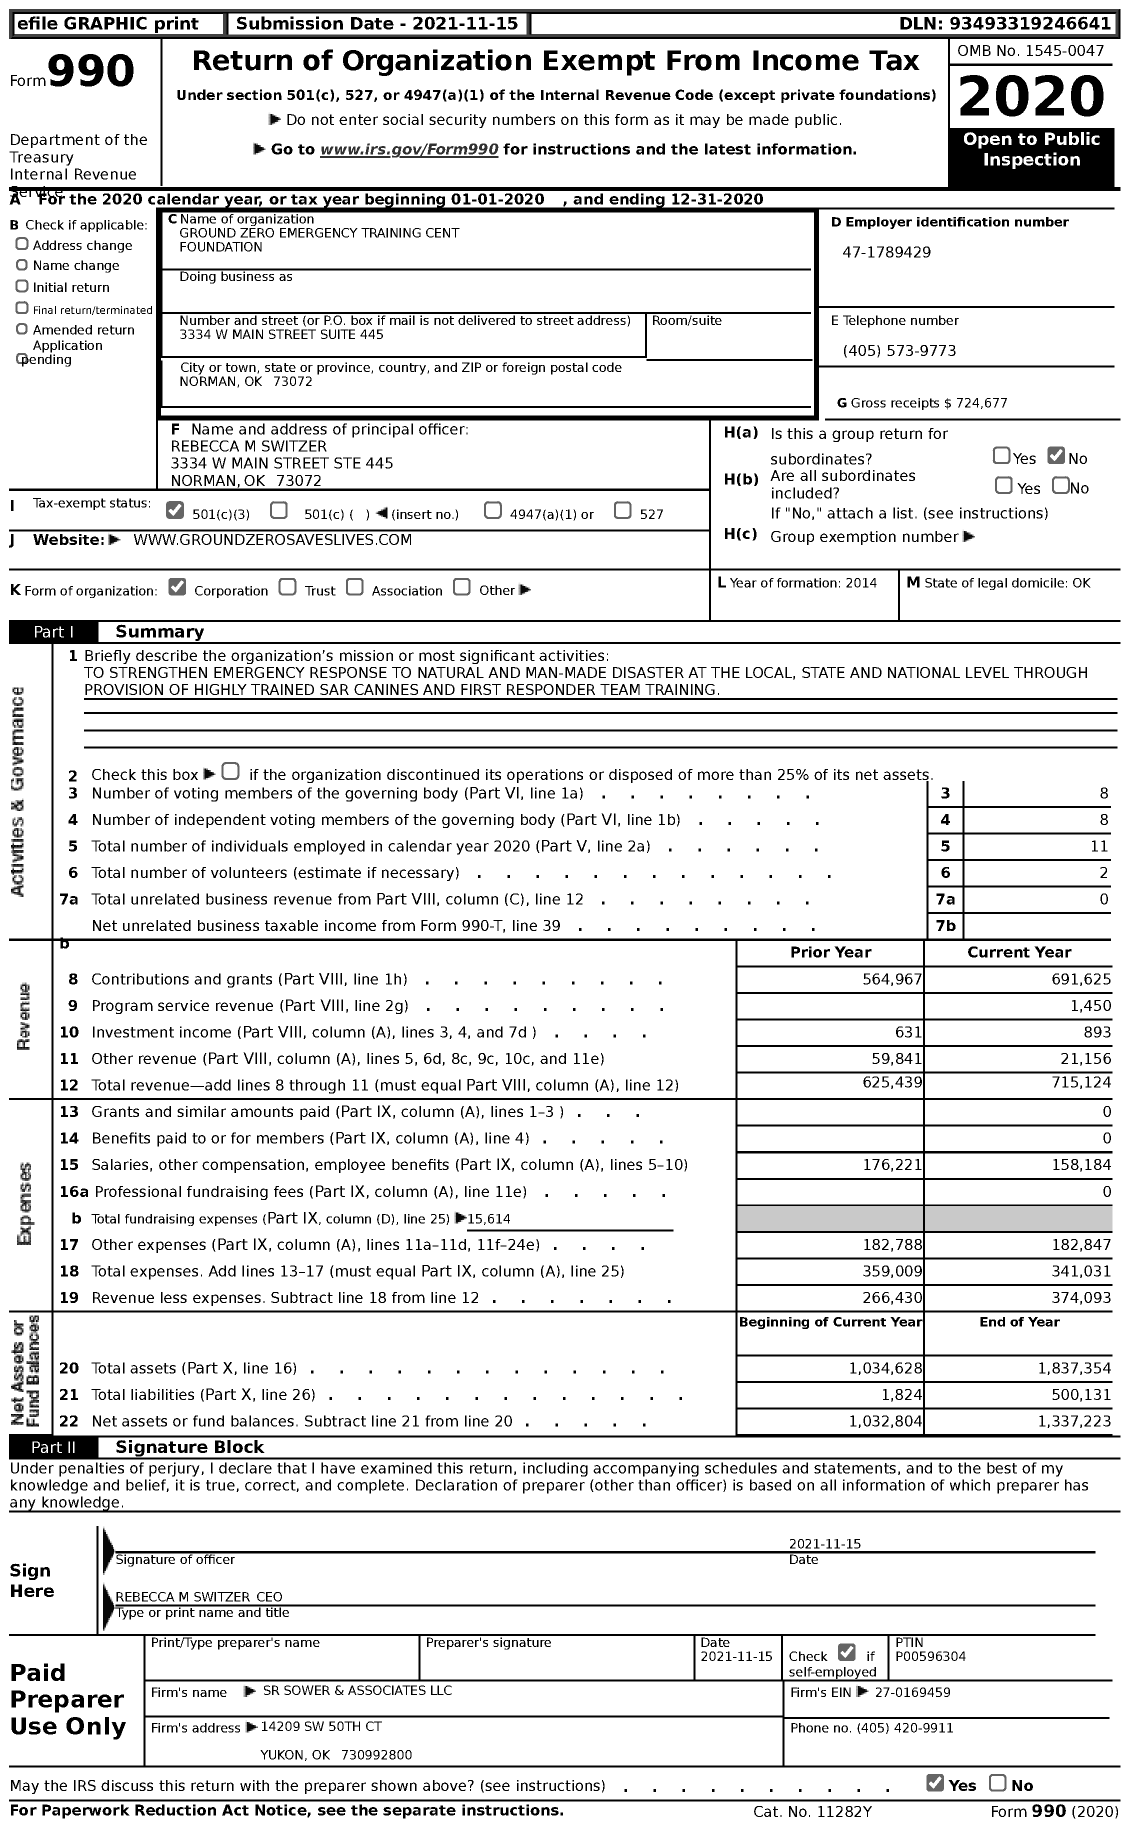 Image of first page of 2020 Form 990 for Ground Zero Emergency Training Cent Foundation